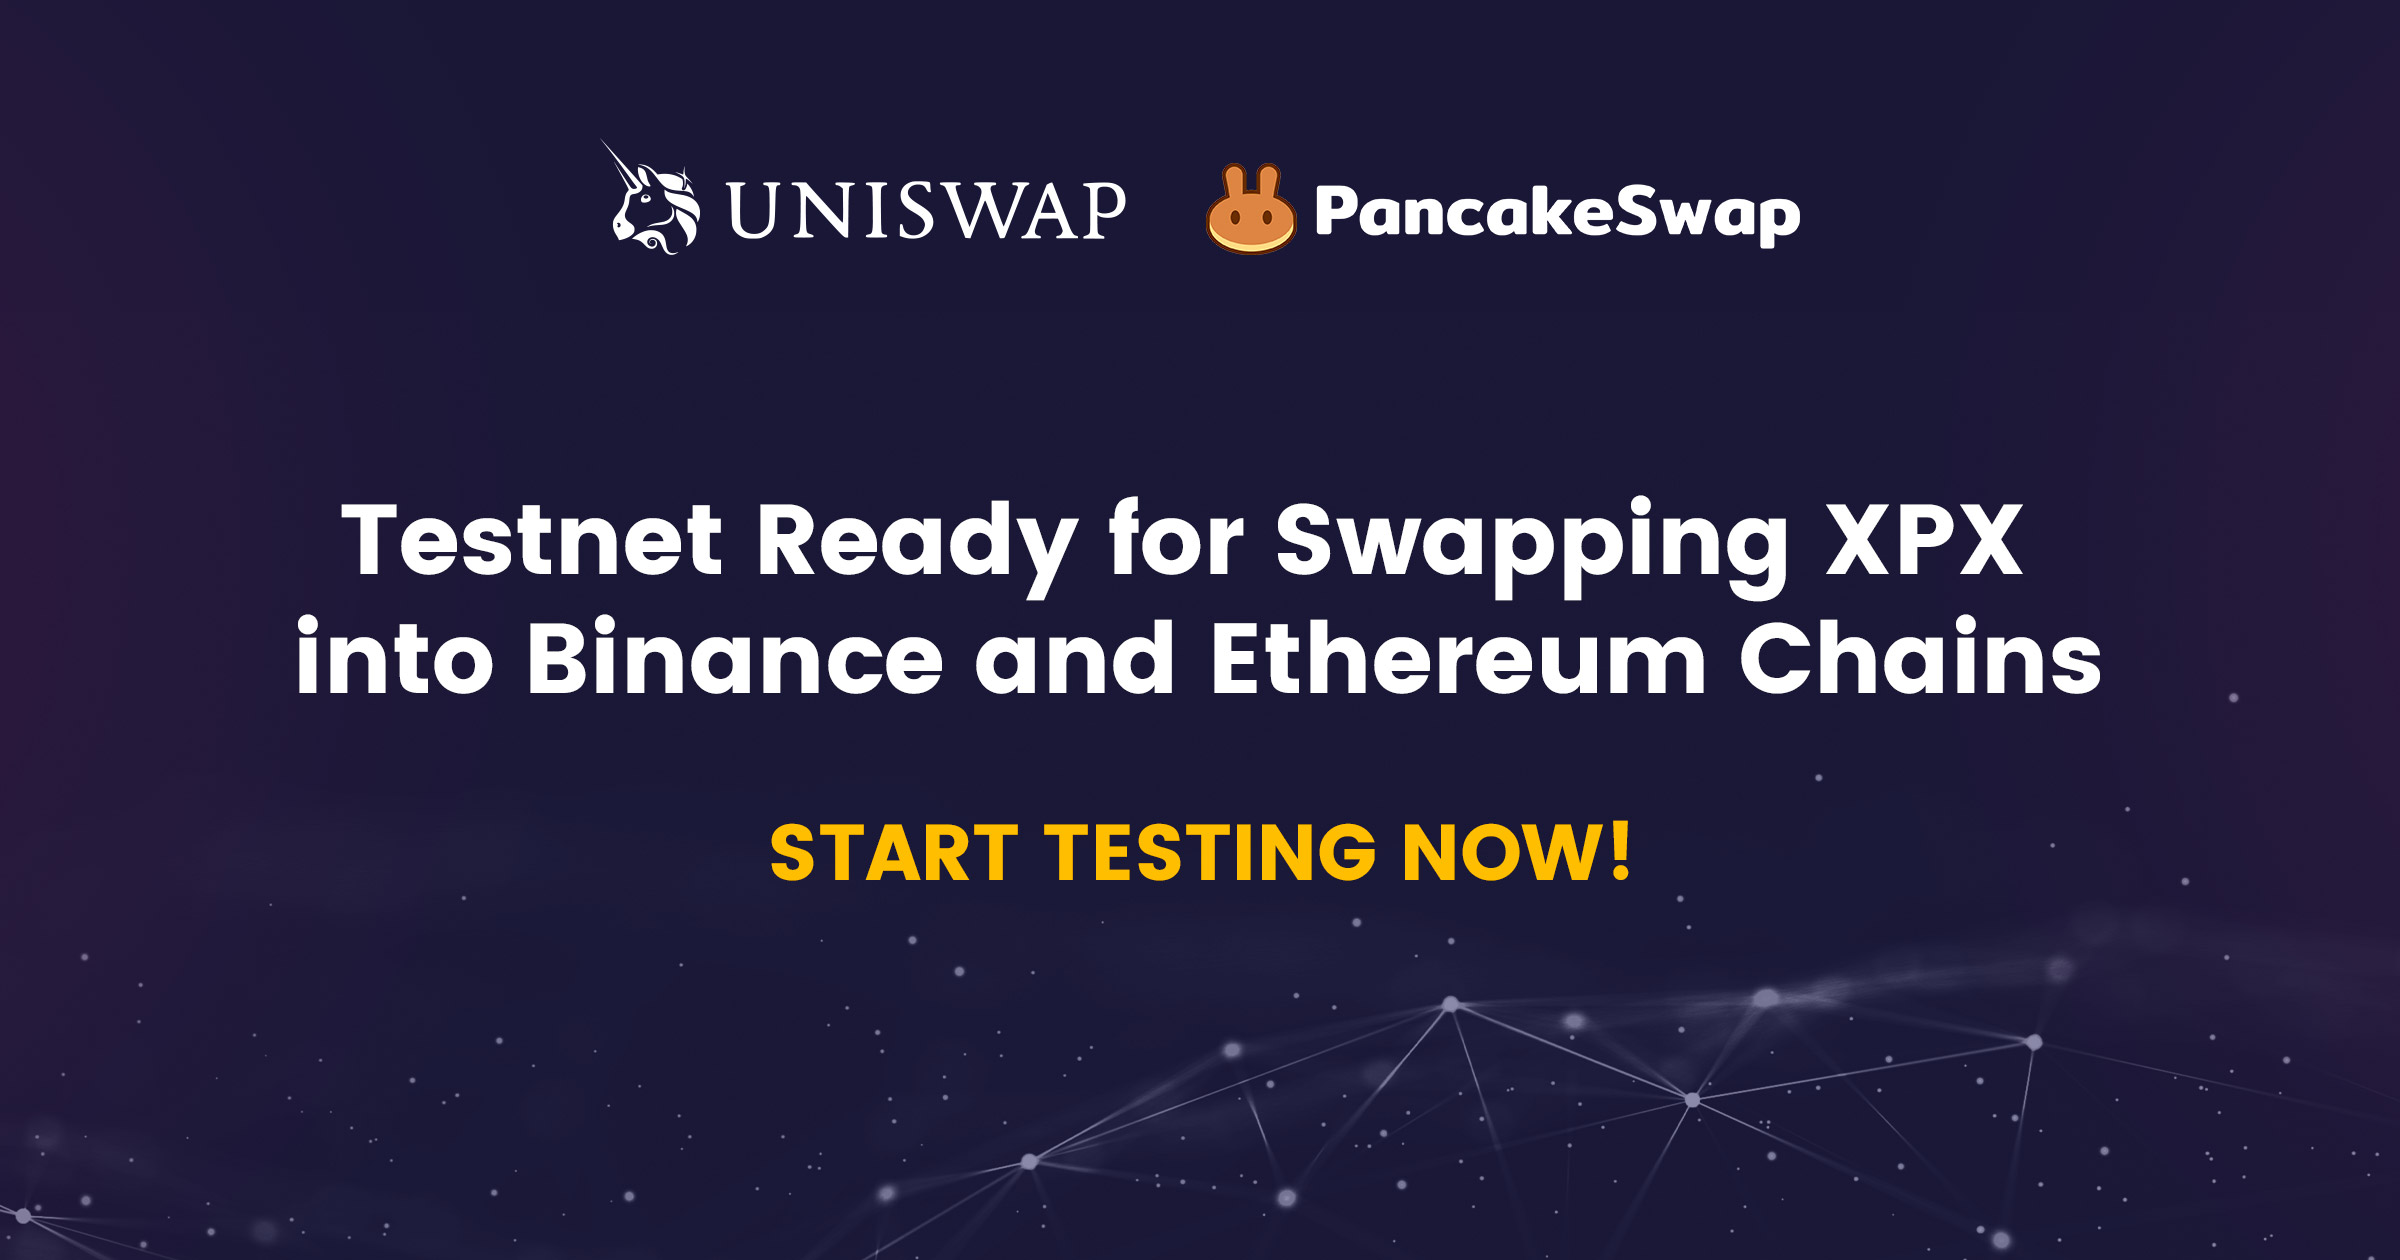 TESTNET READY FOR SWAPPING XPX INTO BINANCE AND ETHEREUM CHAINS